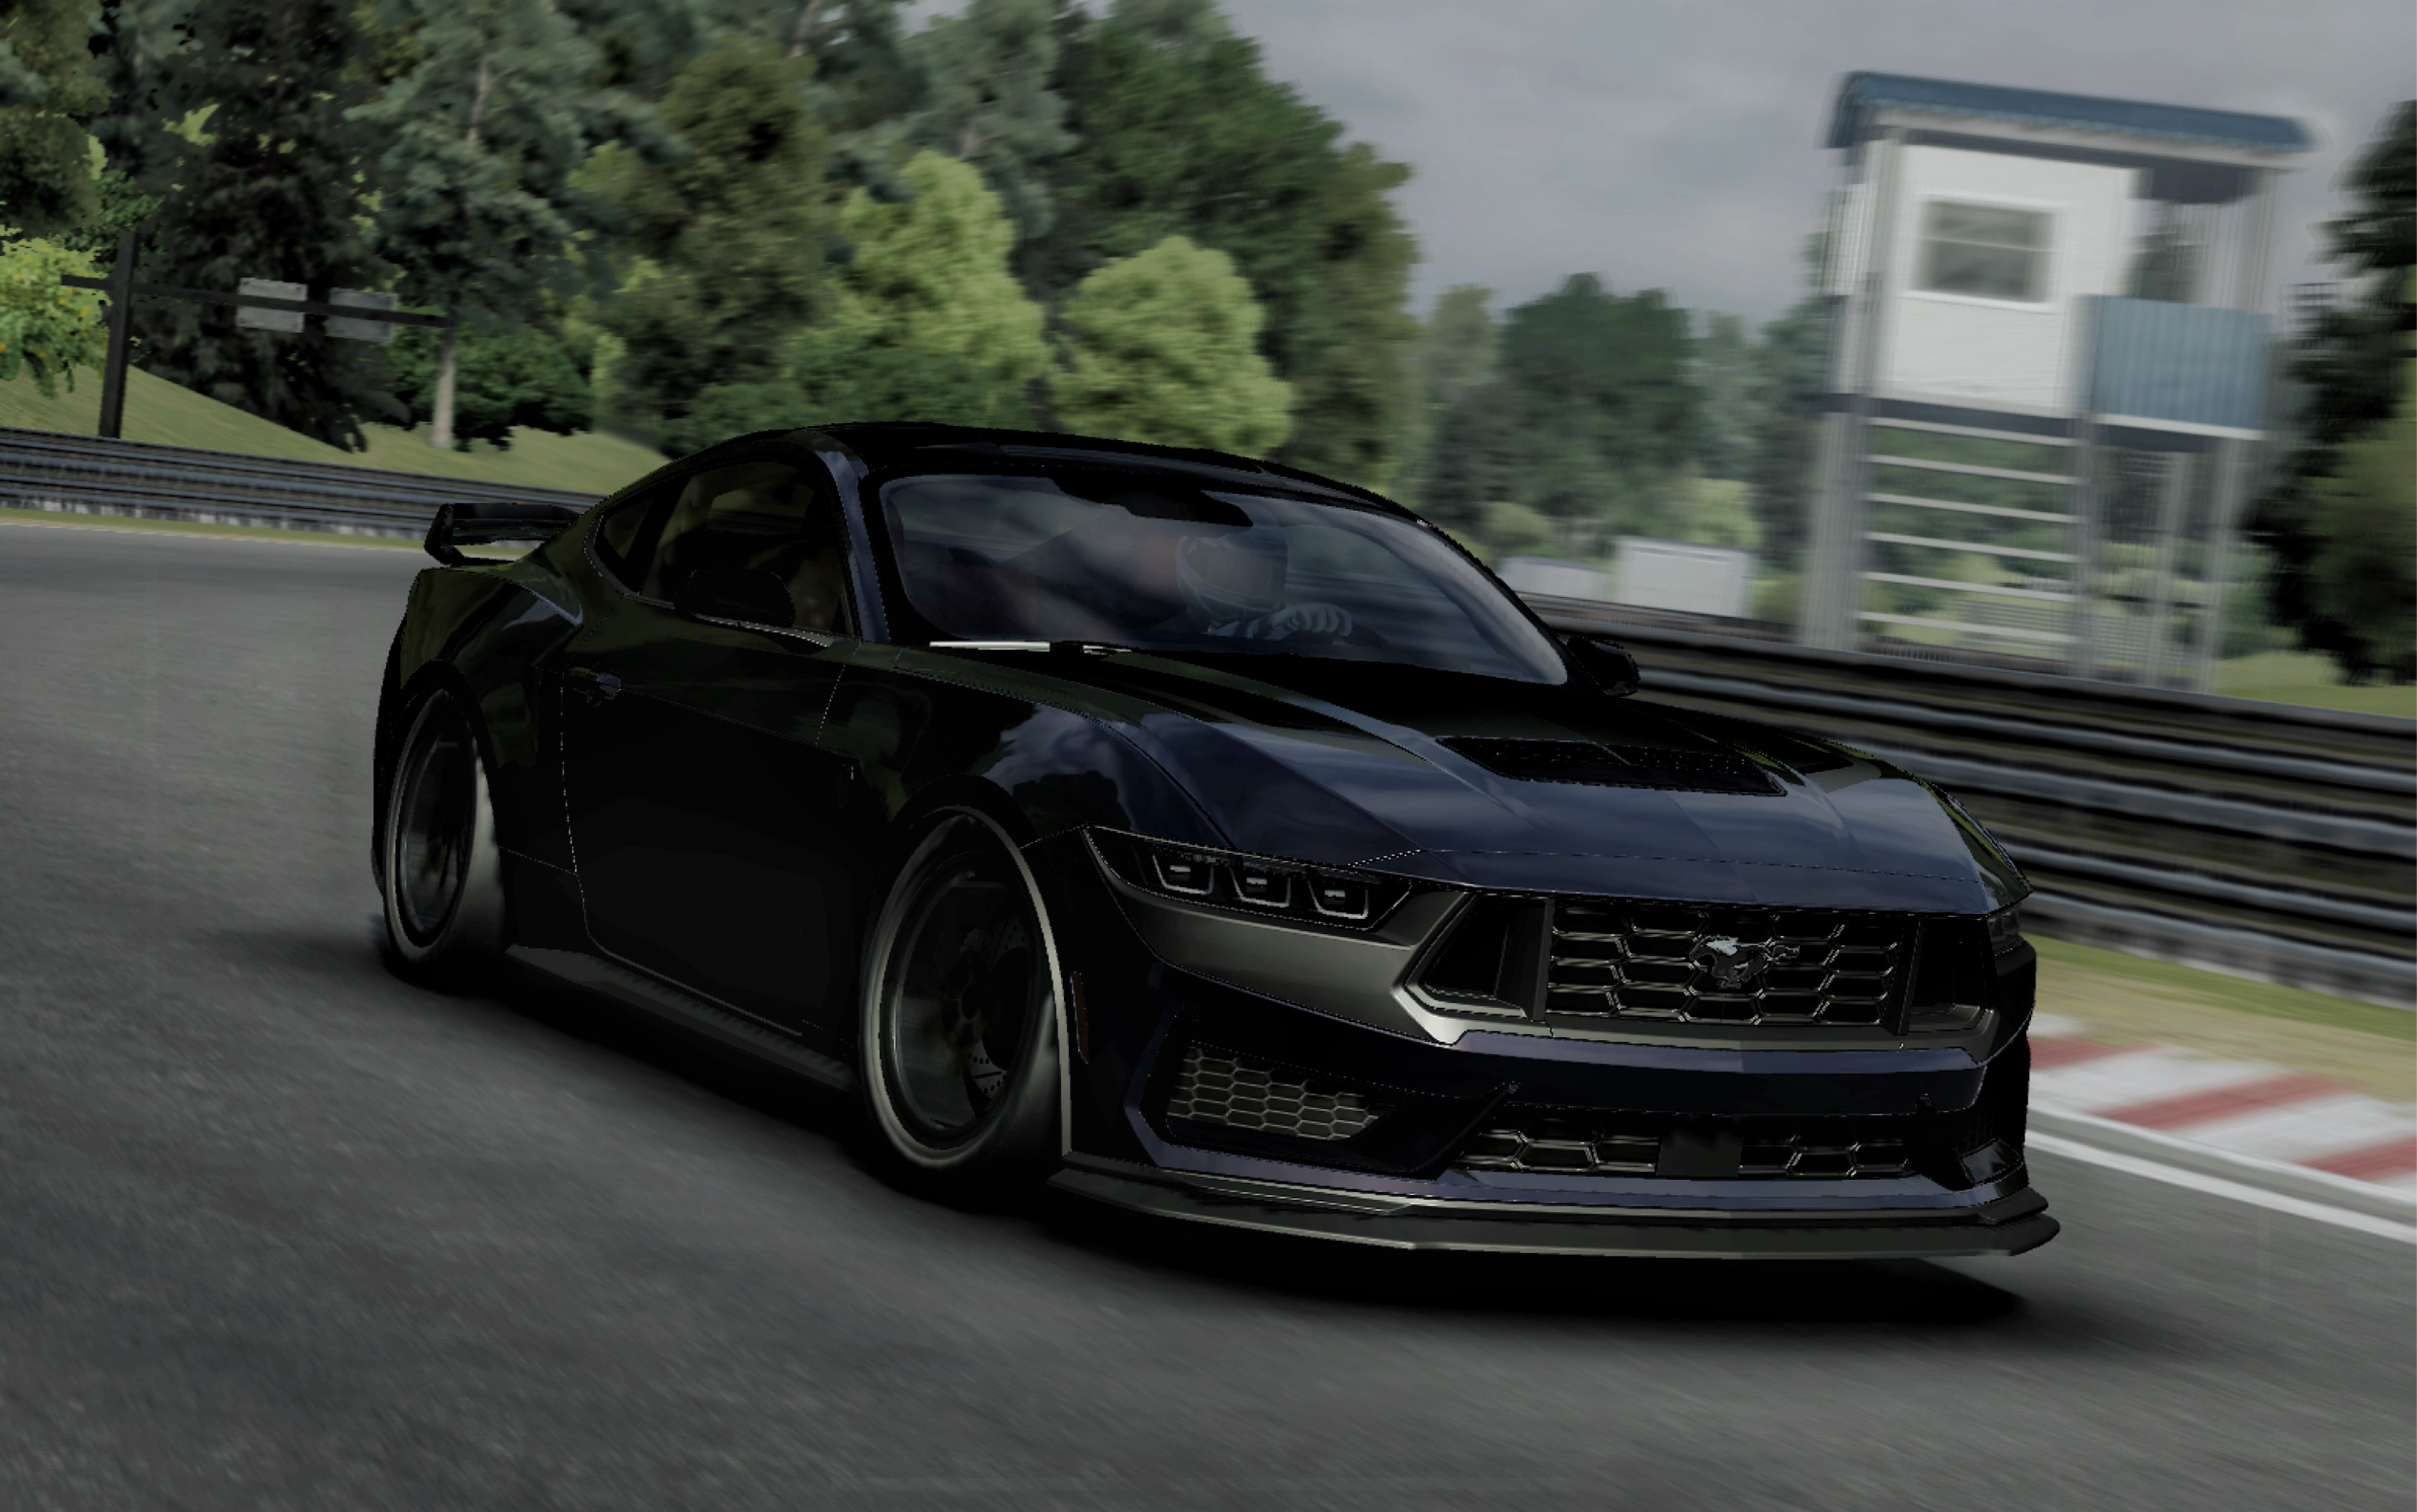 「AR」Ford 24^Mustang Dark Horse森林Forest Path 1:14.980